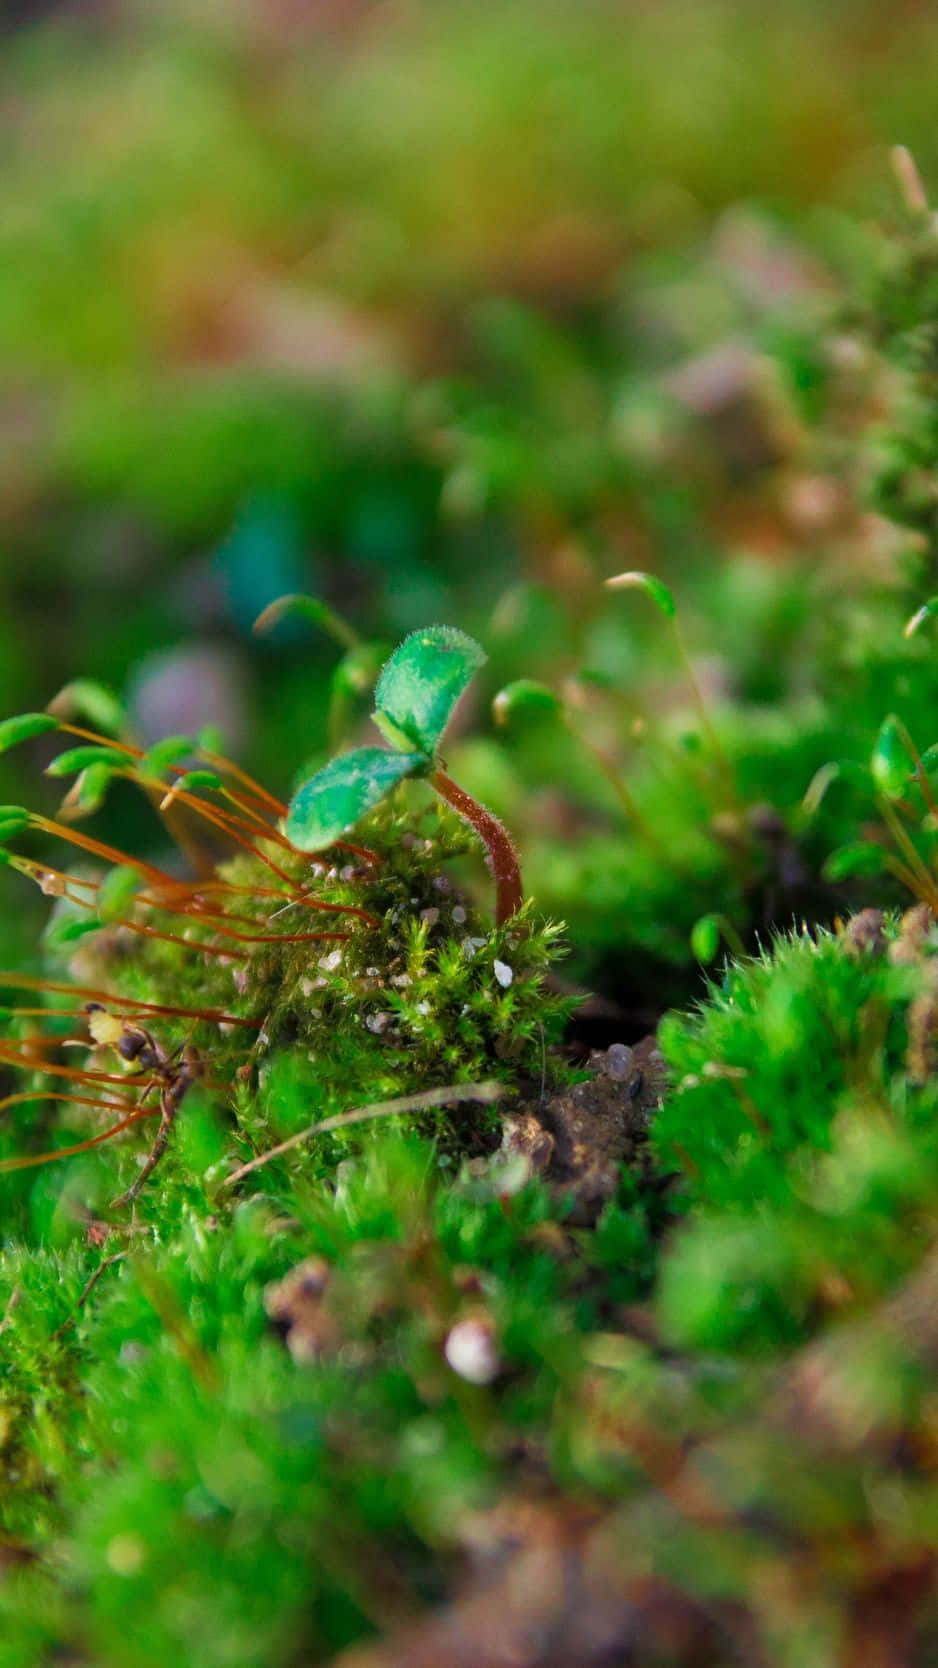 Explore the Mysteriously Inviting World of Moss